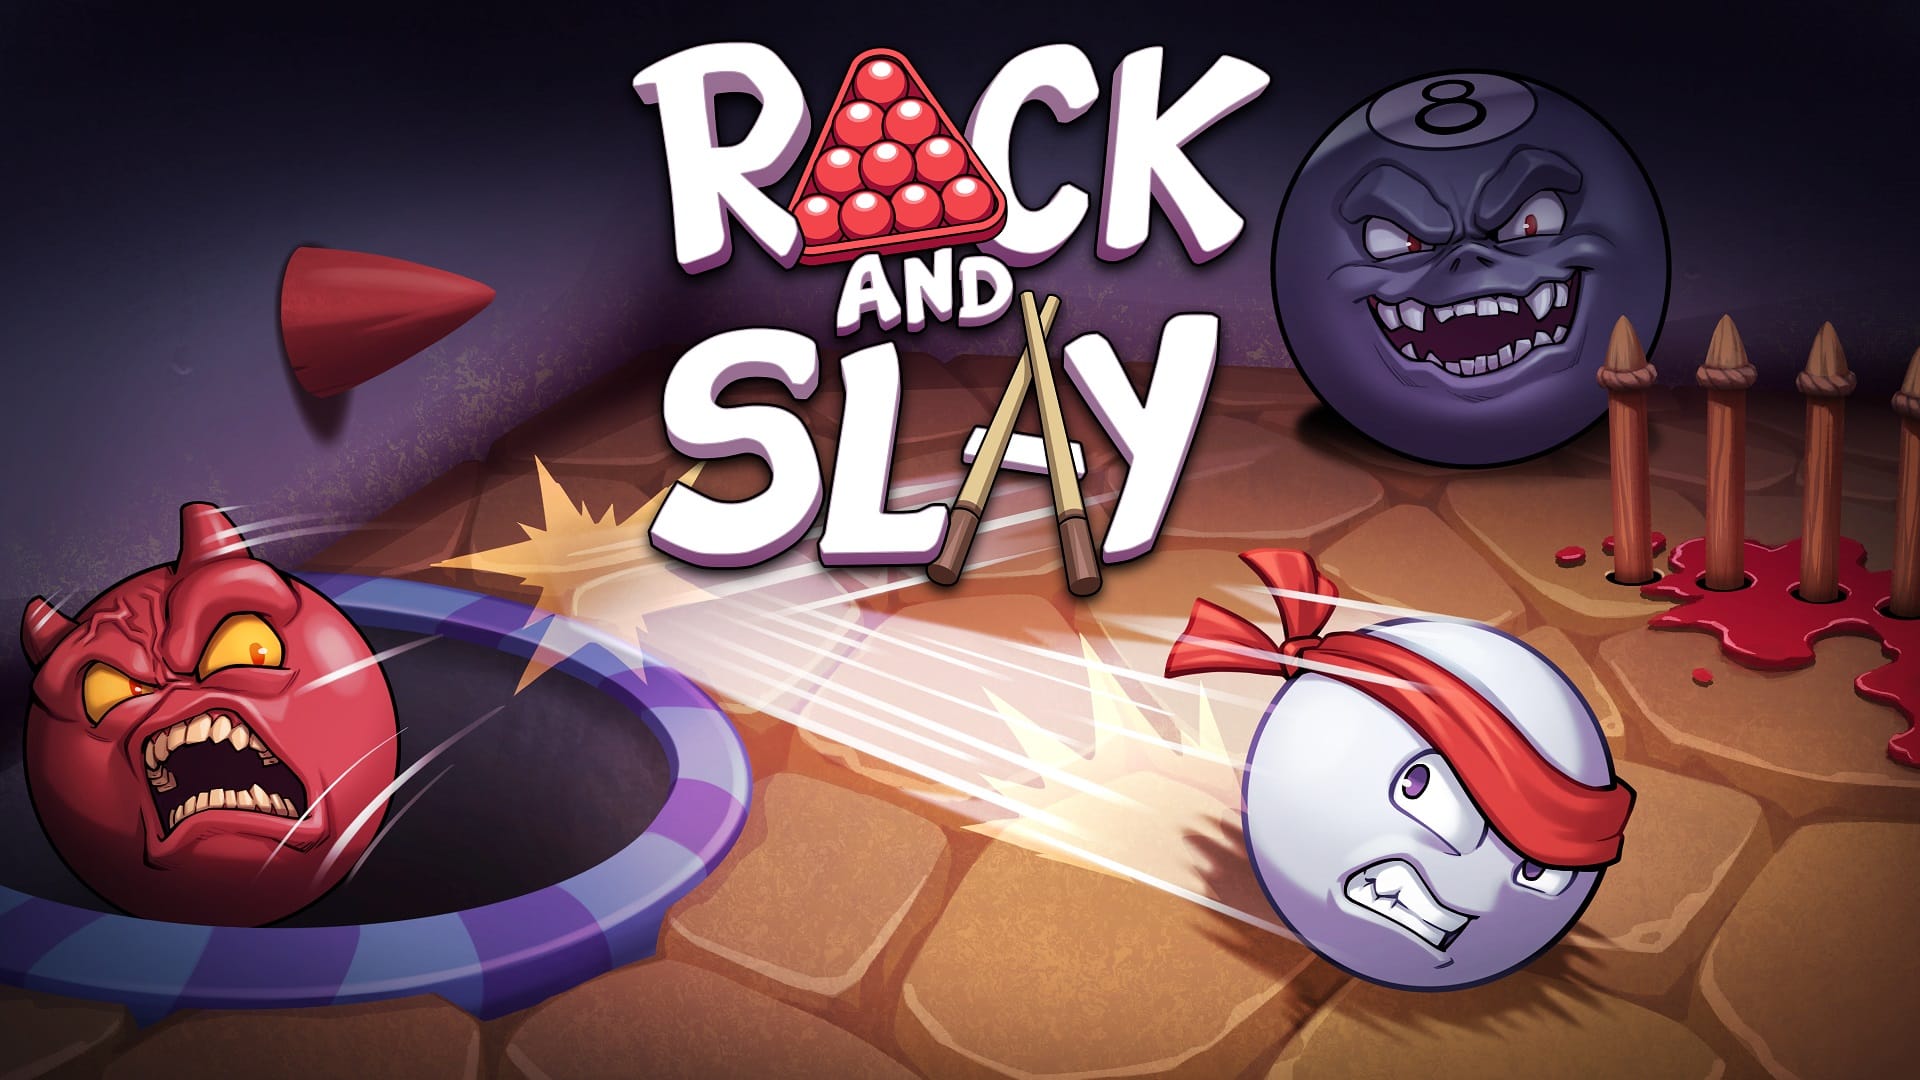 Rack and Slay: A Unique Roguelike Experience Where You Play as a Billiard Ball